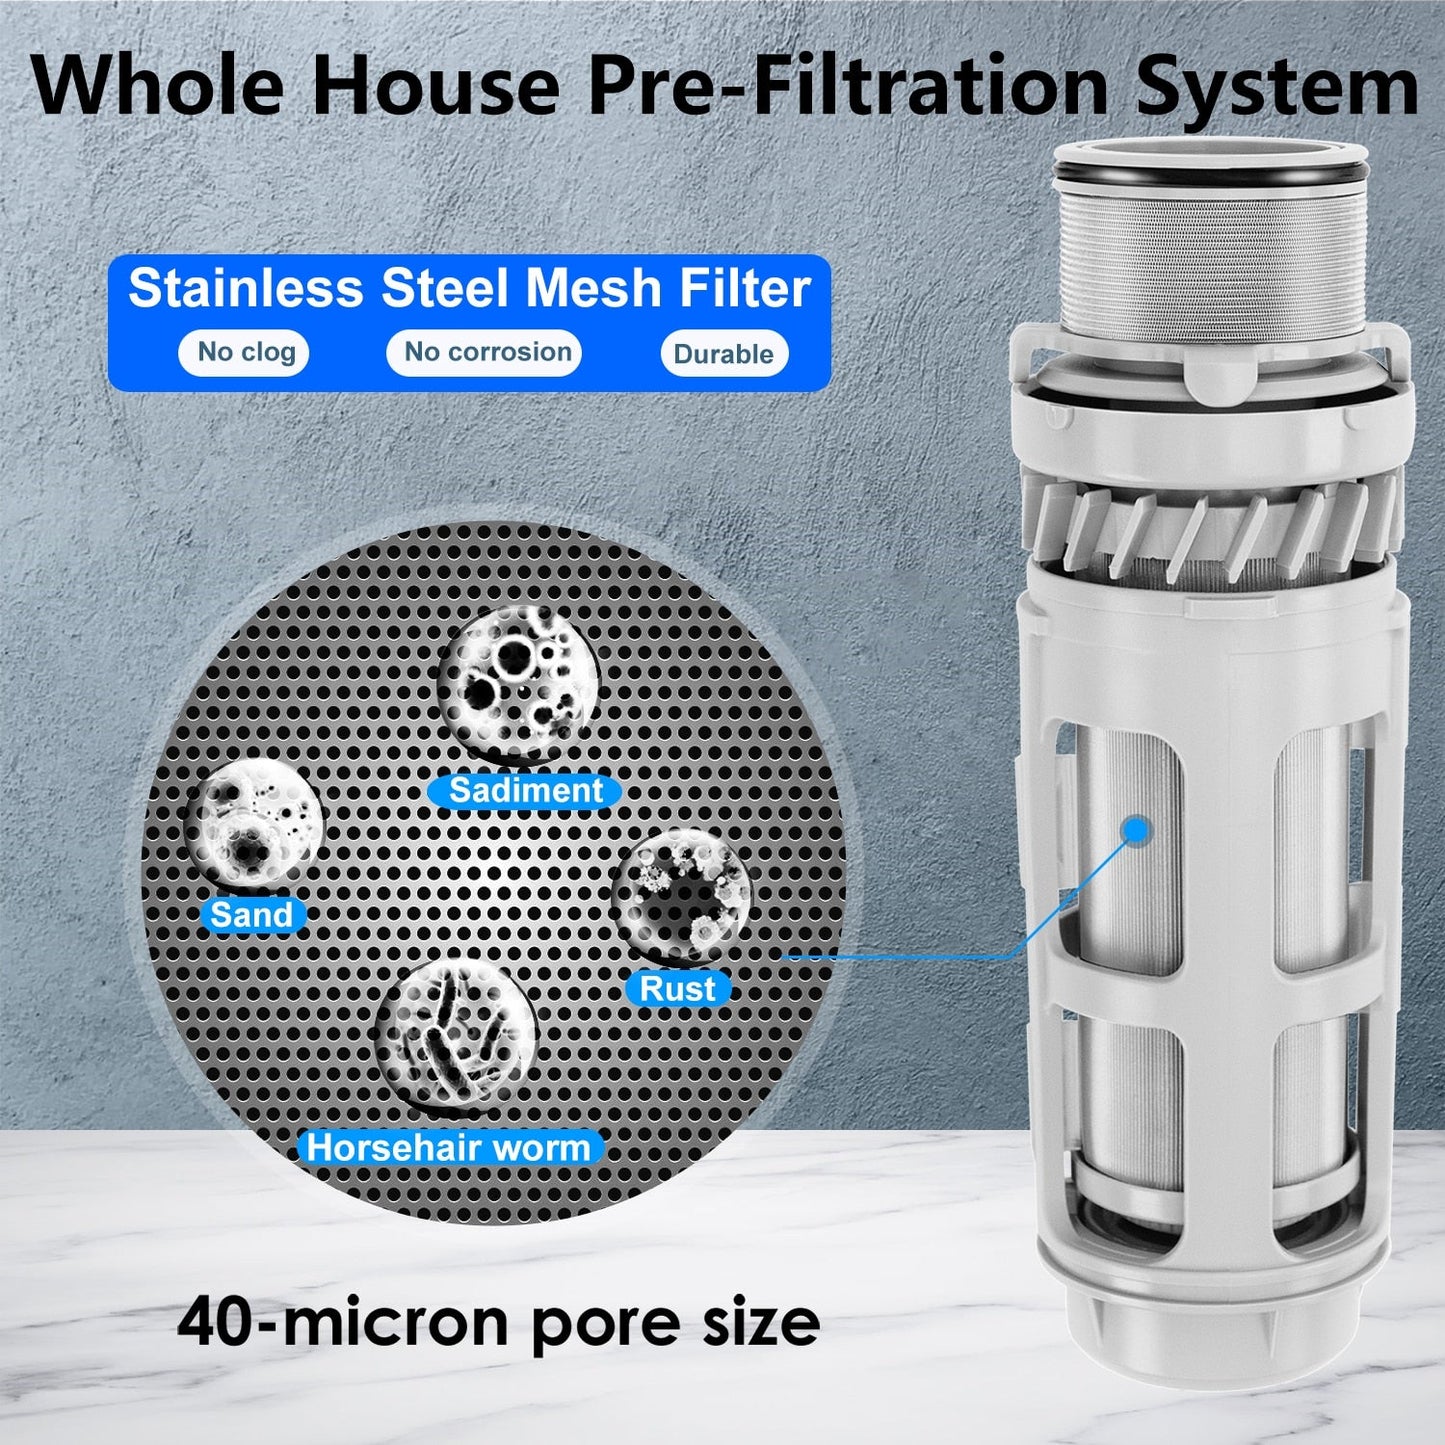 ALTHY PRE-AUTO2 Automatic Flushing Backwash Prefilter Spin Down Sediment Water Filter Central Whole House Purifier System